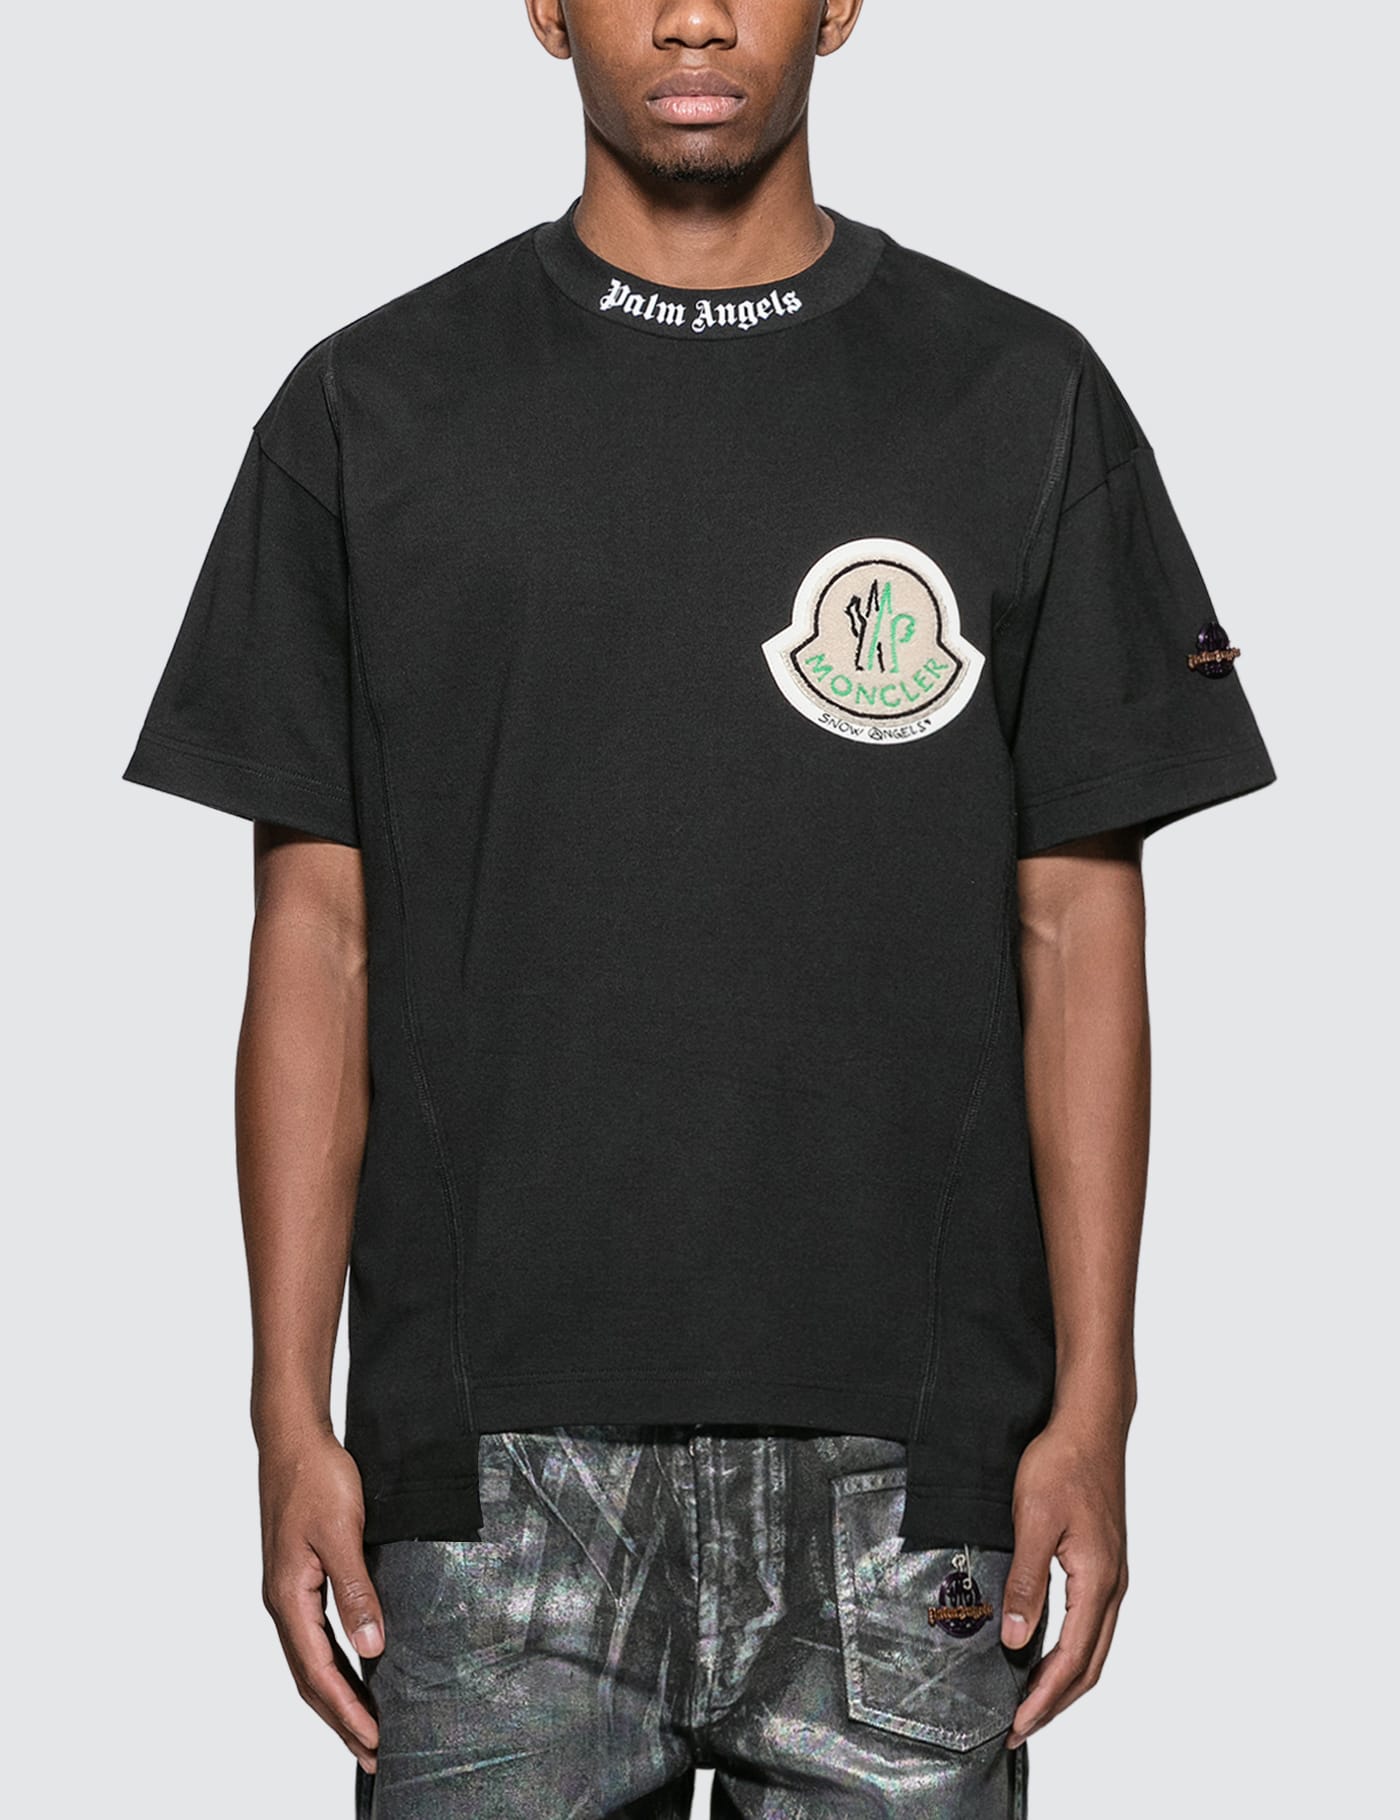 palm angels x moncler tee